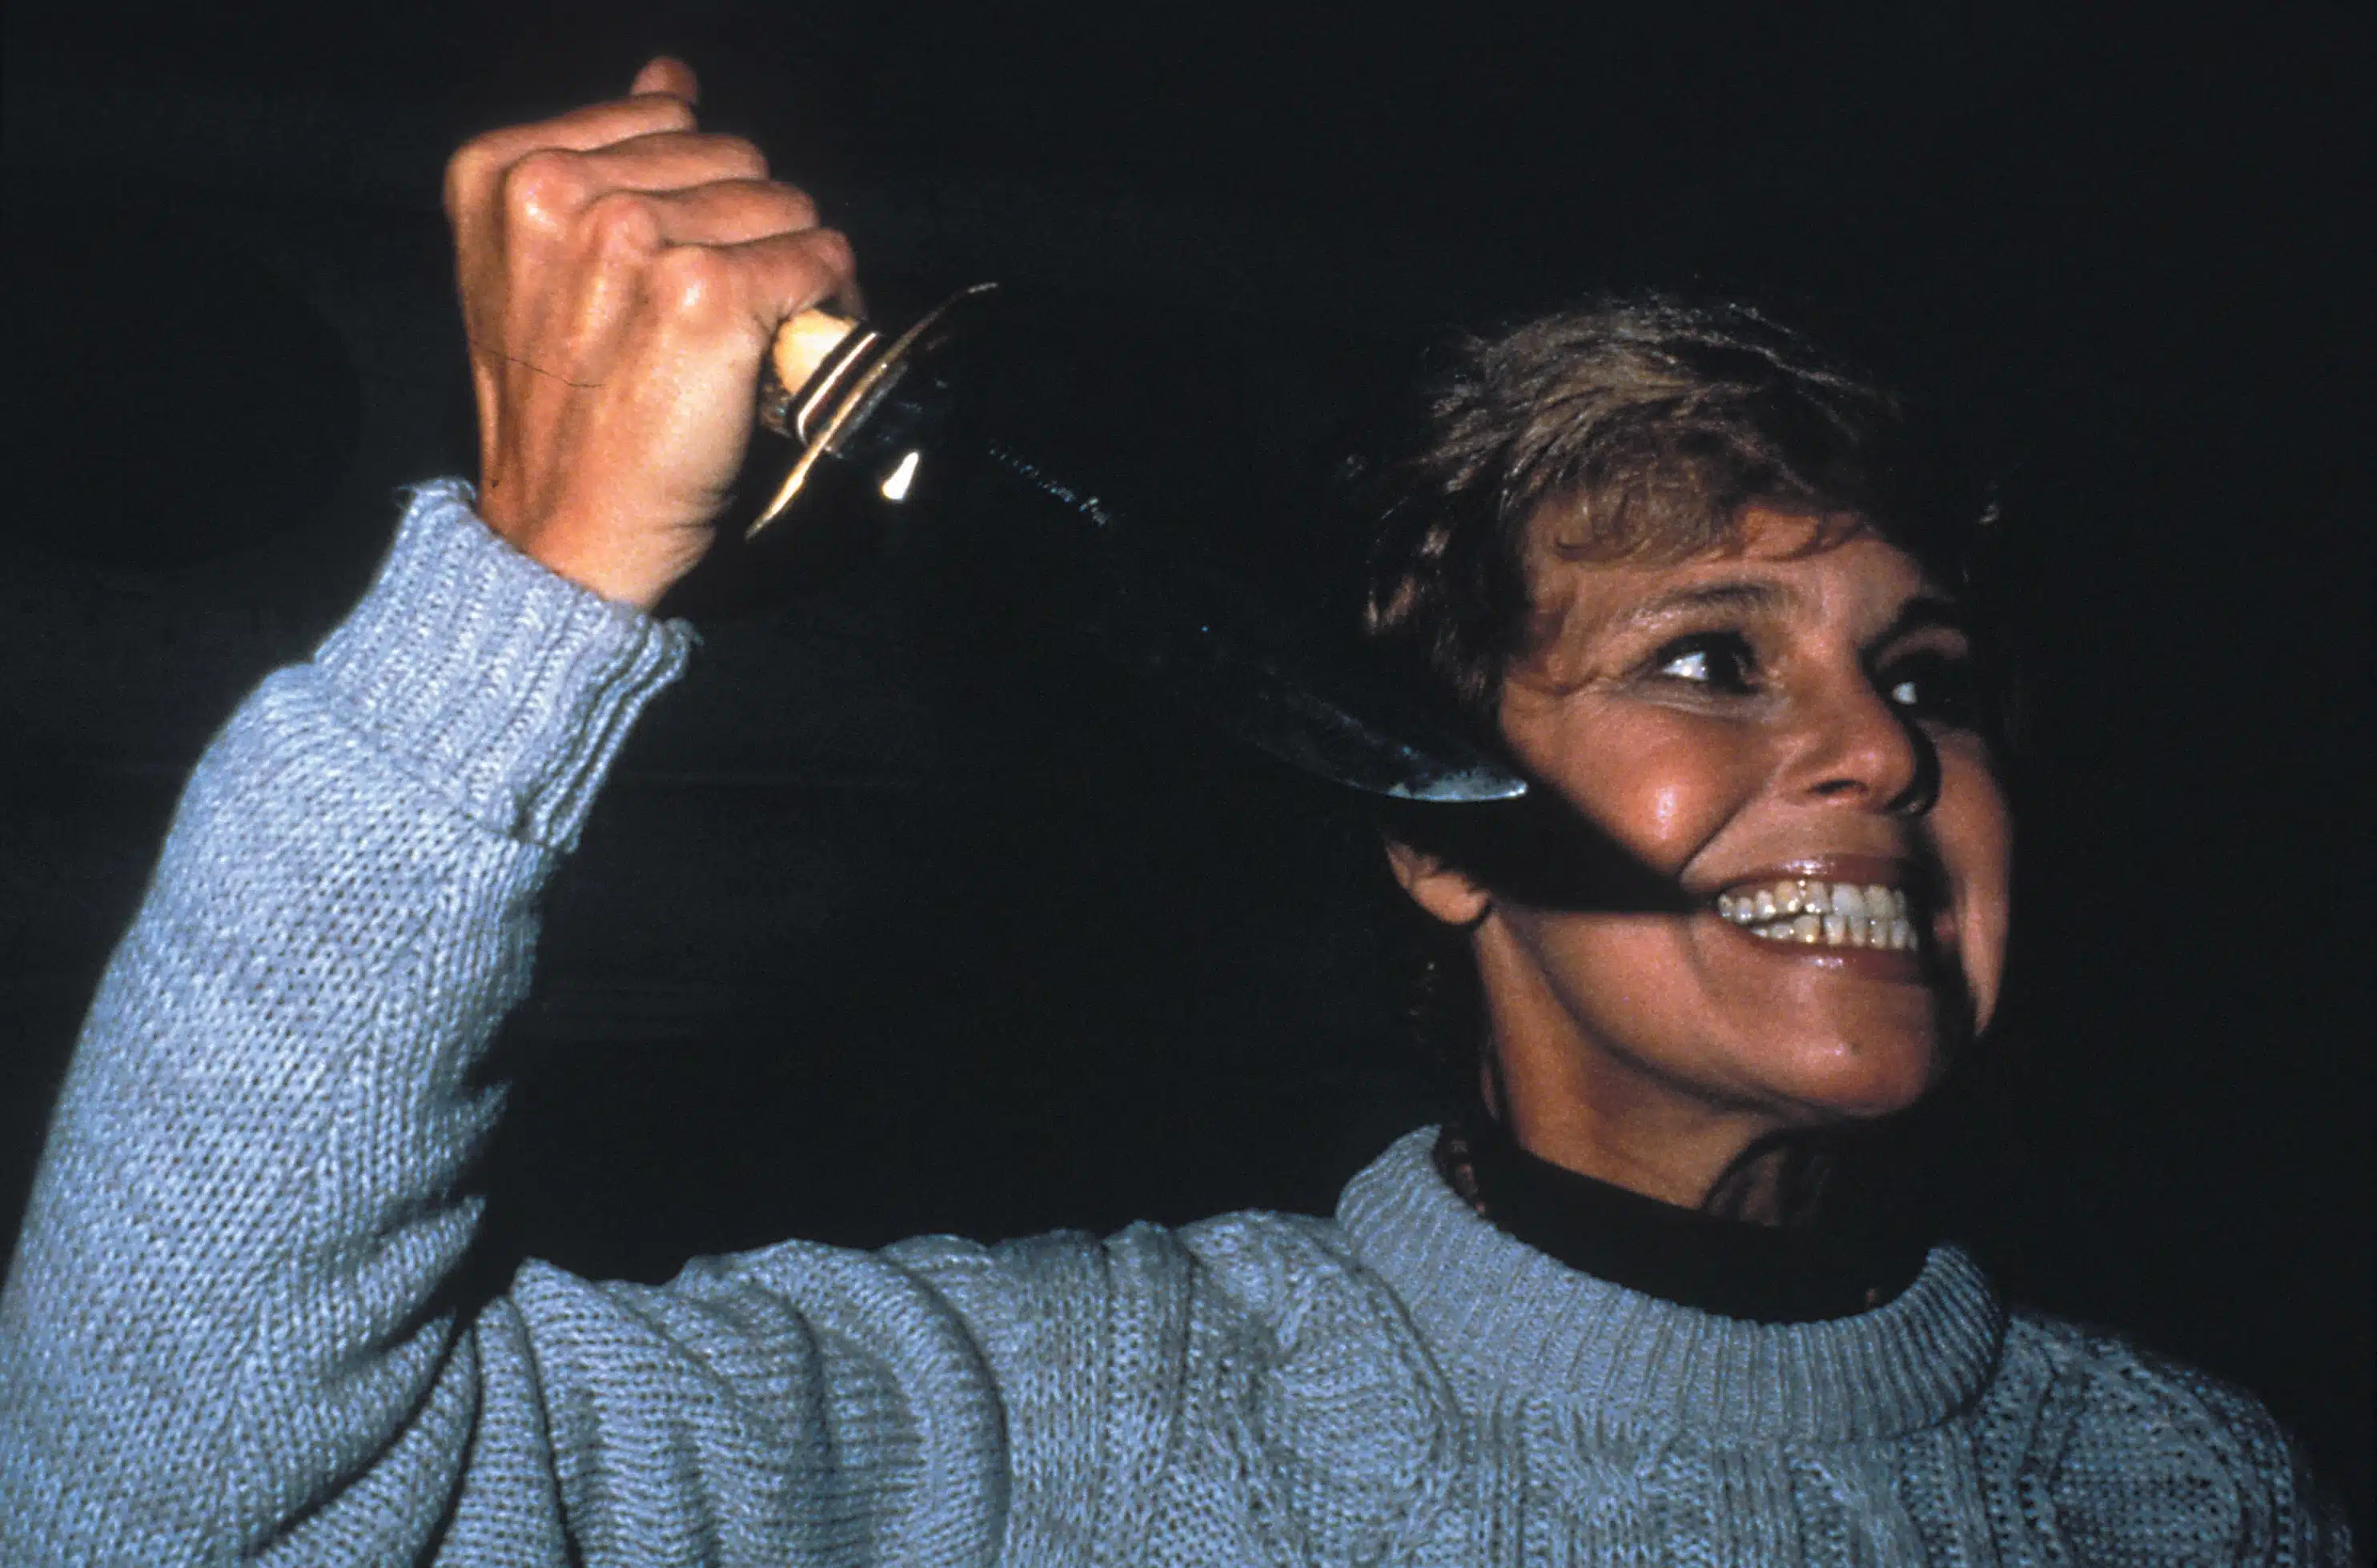 Pamela Voorhees, mother of Jason Voorhees, from Friday the 13th